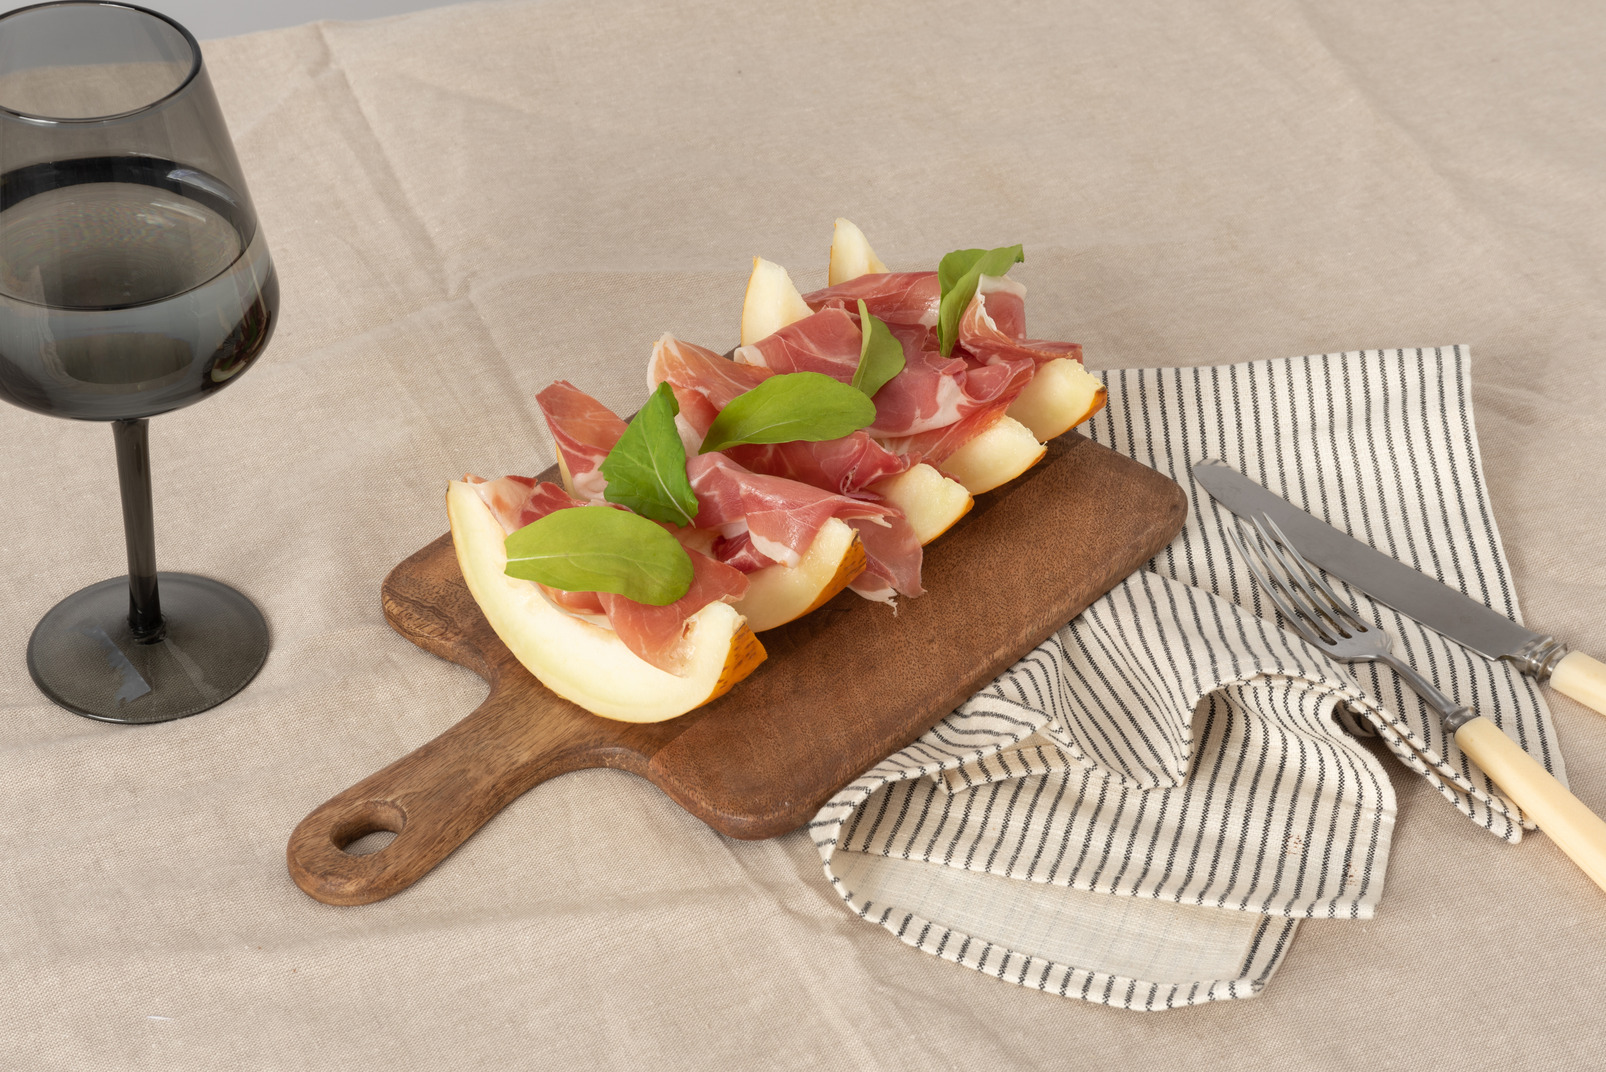 Appetizer with fresh melon and ham served on a wooden board